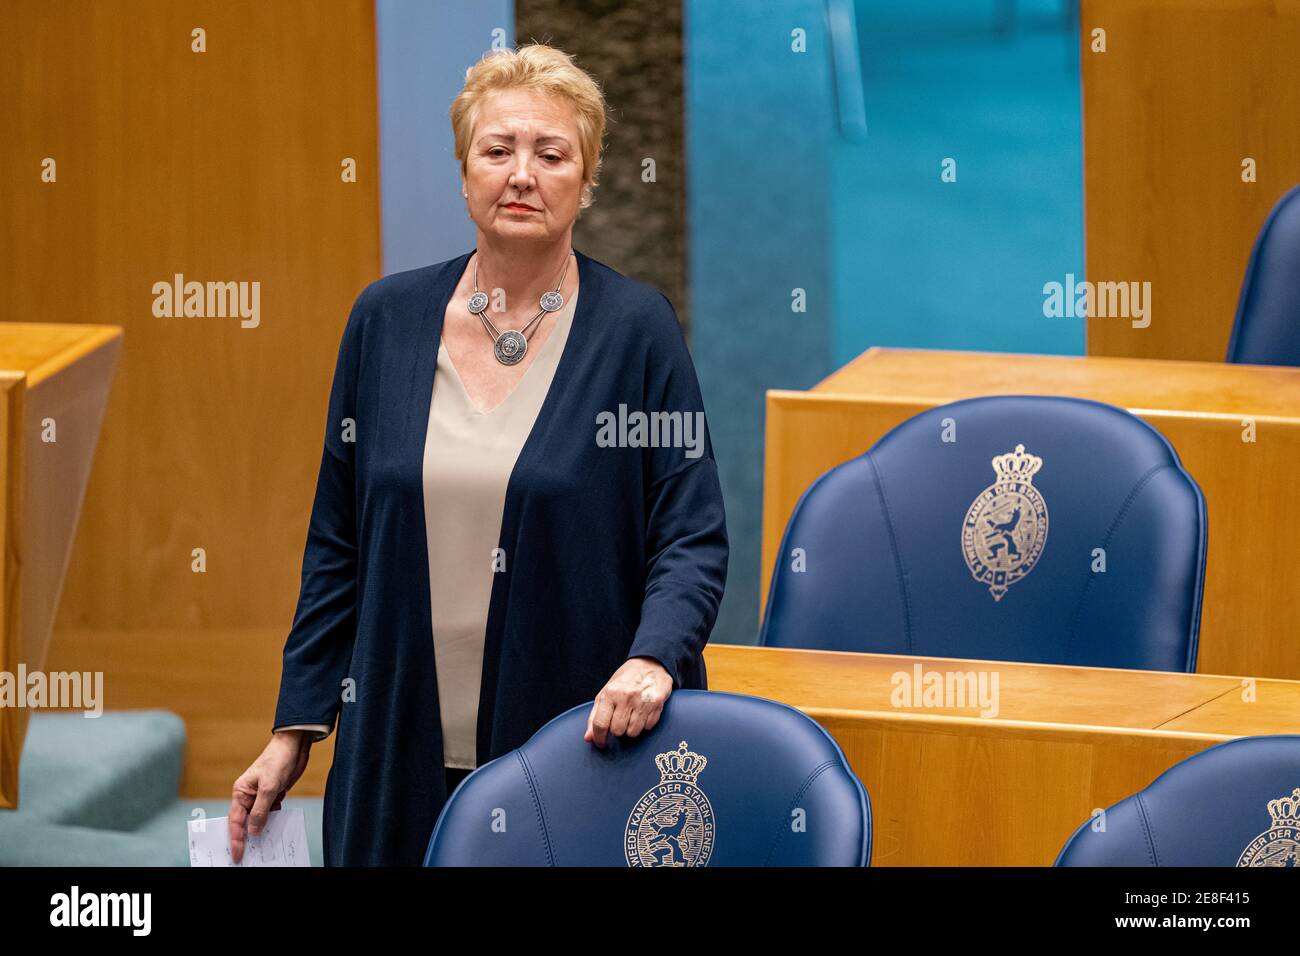 THE HAGUE, NETHERLANDS - JANUARY 19: Corrie van Brenk of 50PLUS seen during the plenary debate in the Tweede Kamer parliament about the resignation of Stock Photo